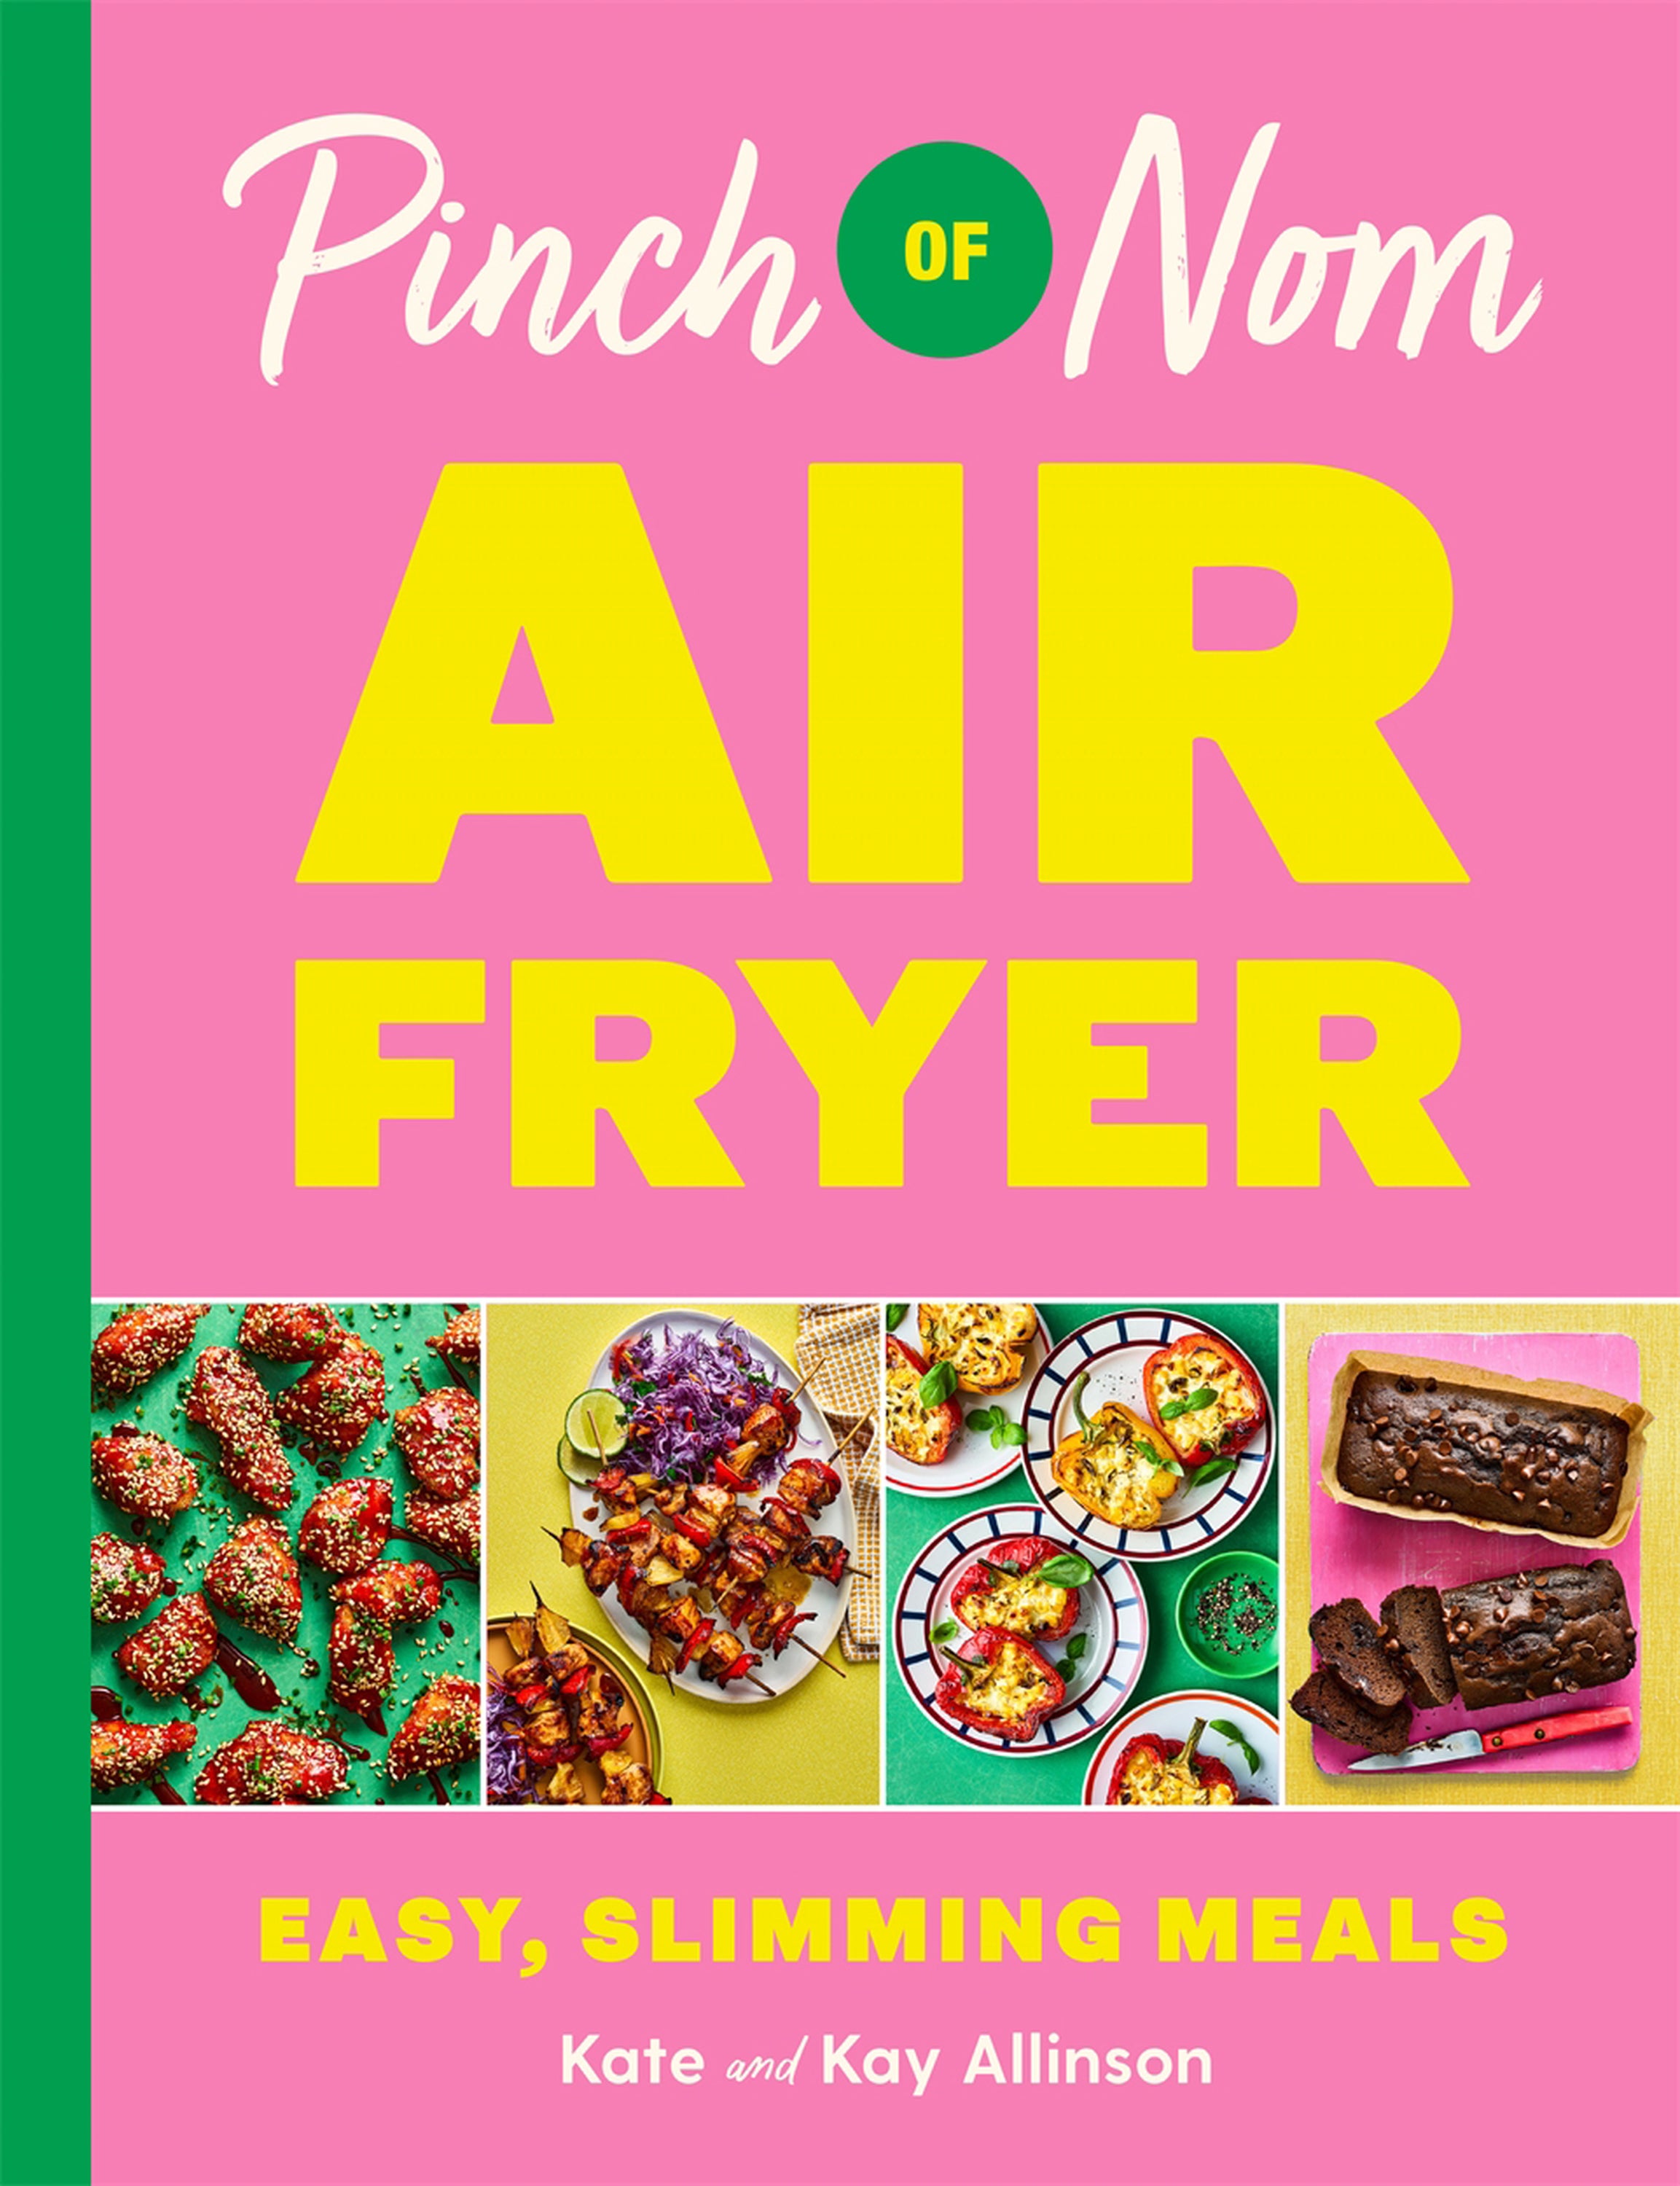 ‘Air Fryer’ is the duo’s most requested cookbook to date